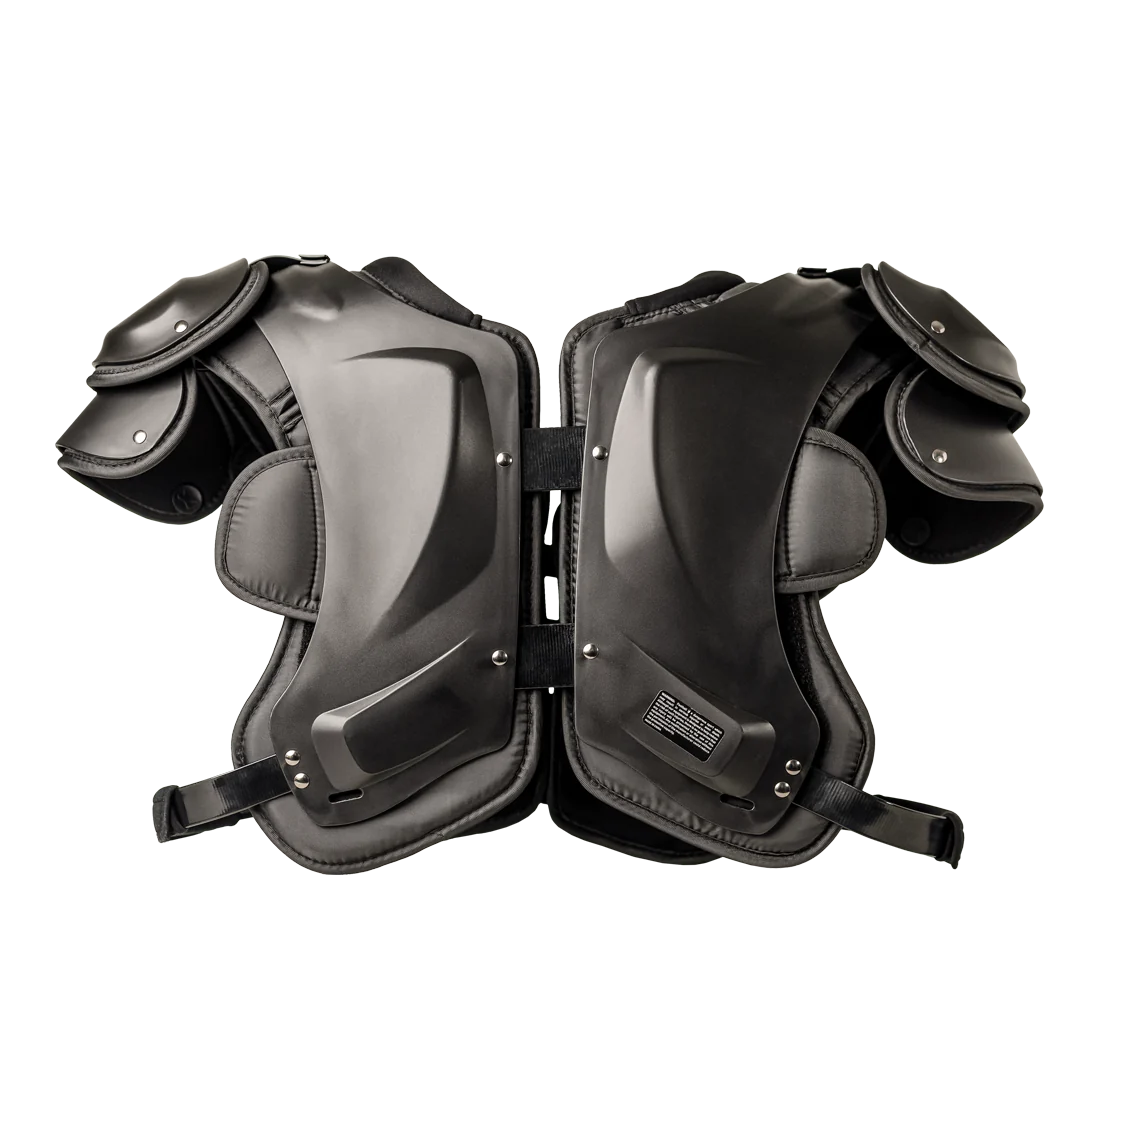 Xenith Velocity 2 shoulder pads/ Velocity shoulder pad